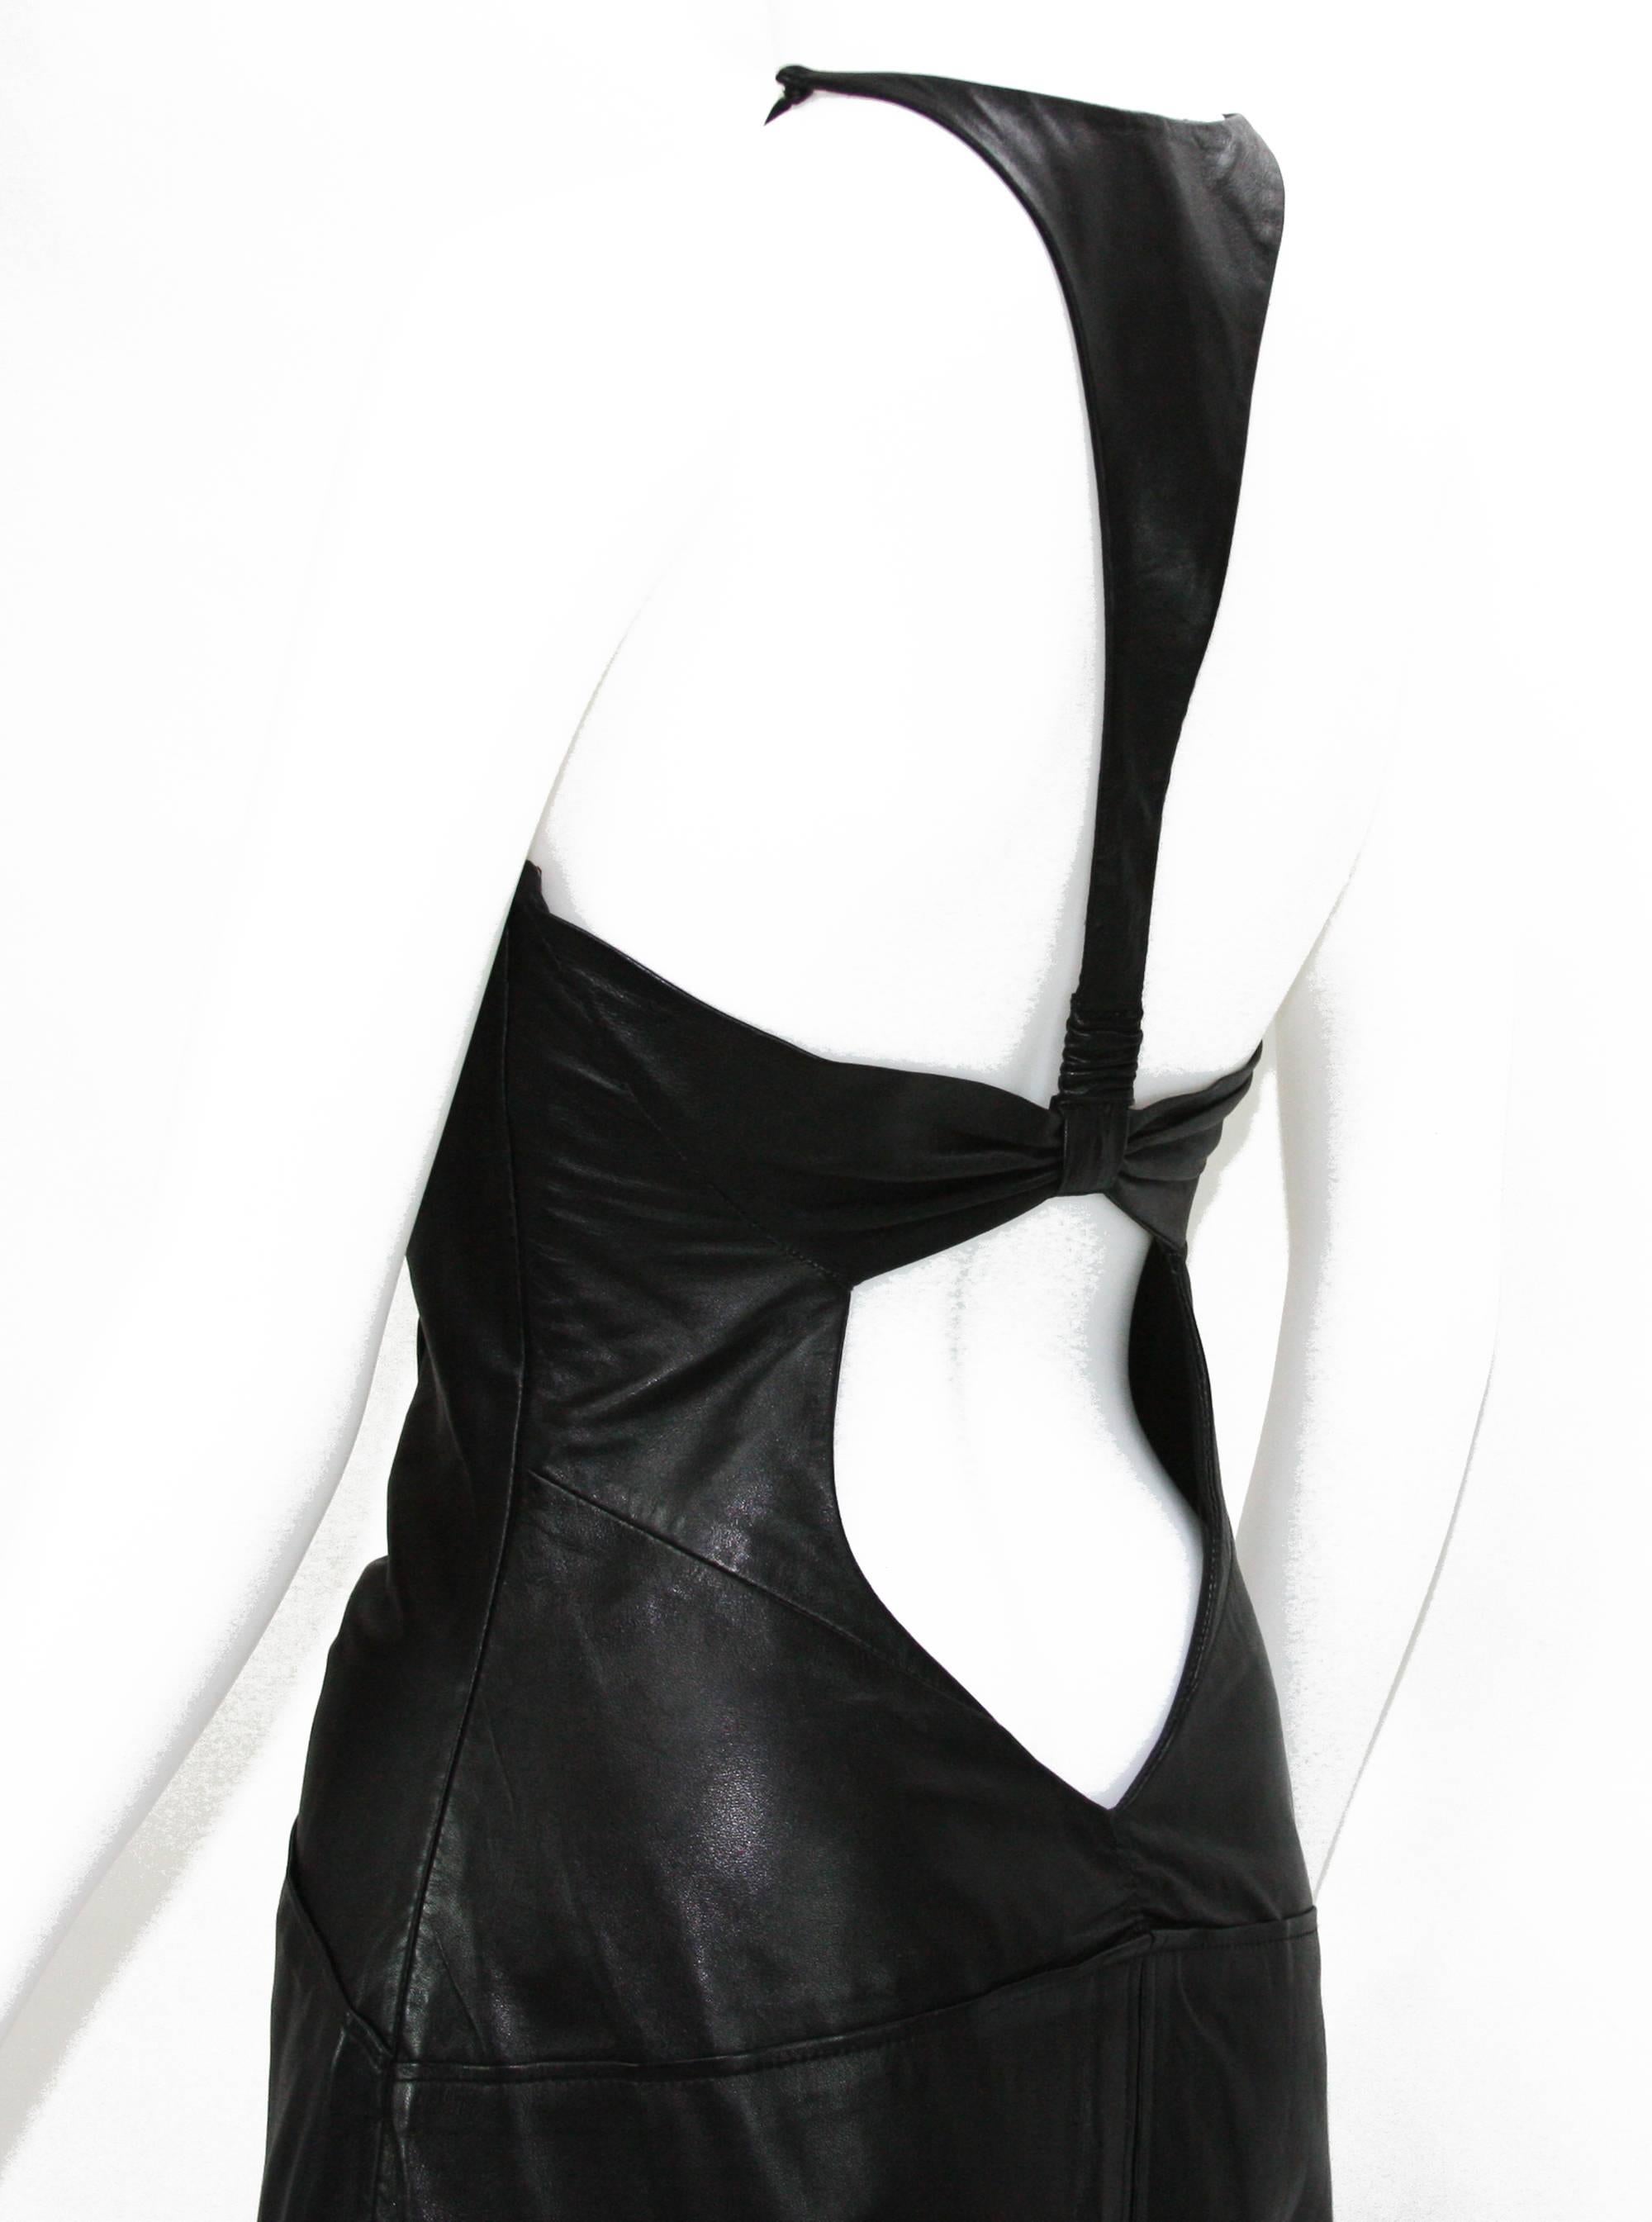 Tom Ford for Gucci 2004 Collection Black Leather Cocktail Dress It. 44 - US 8 For Sale 4